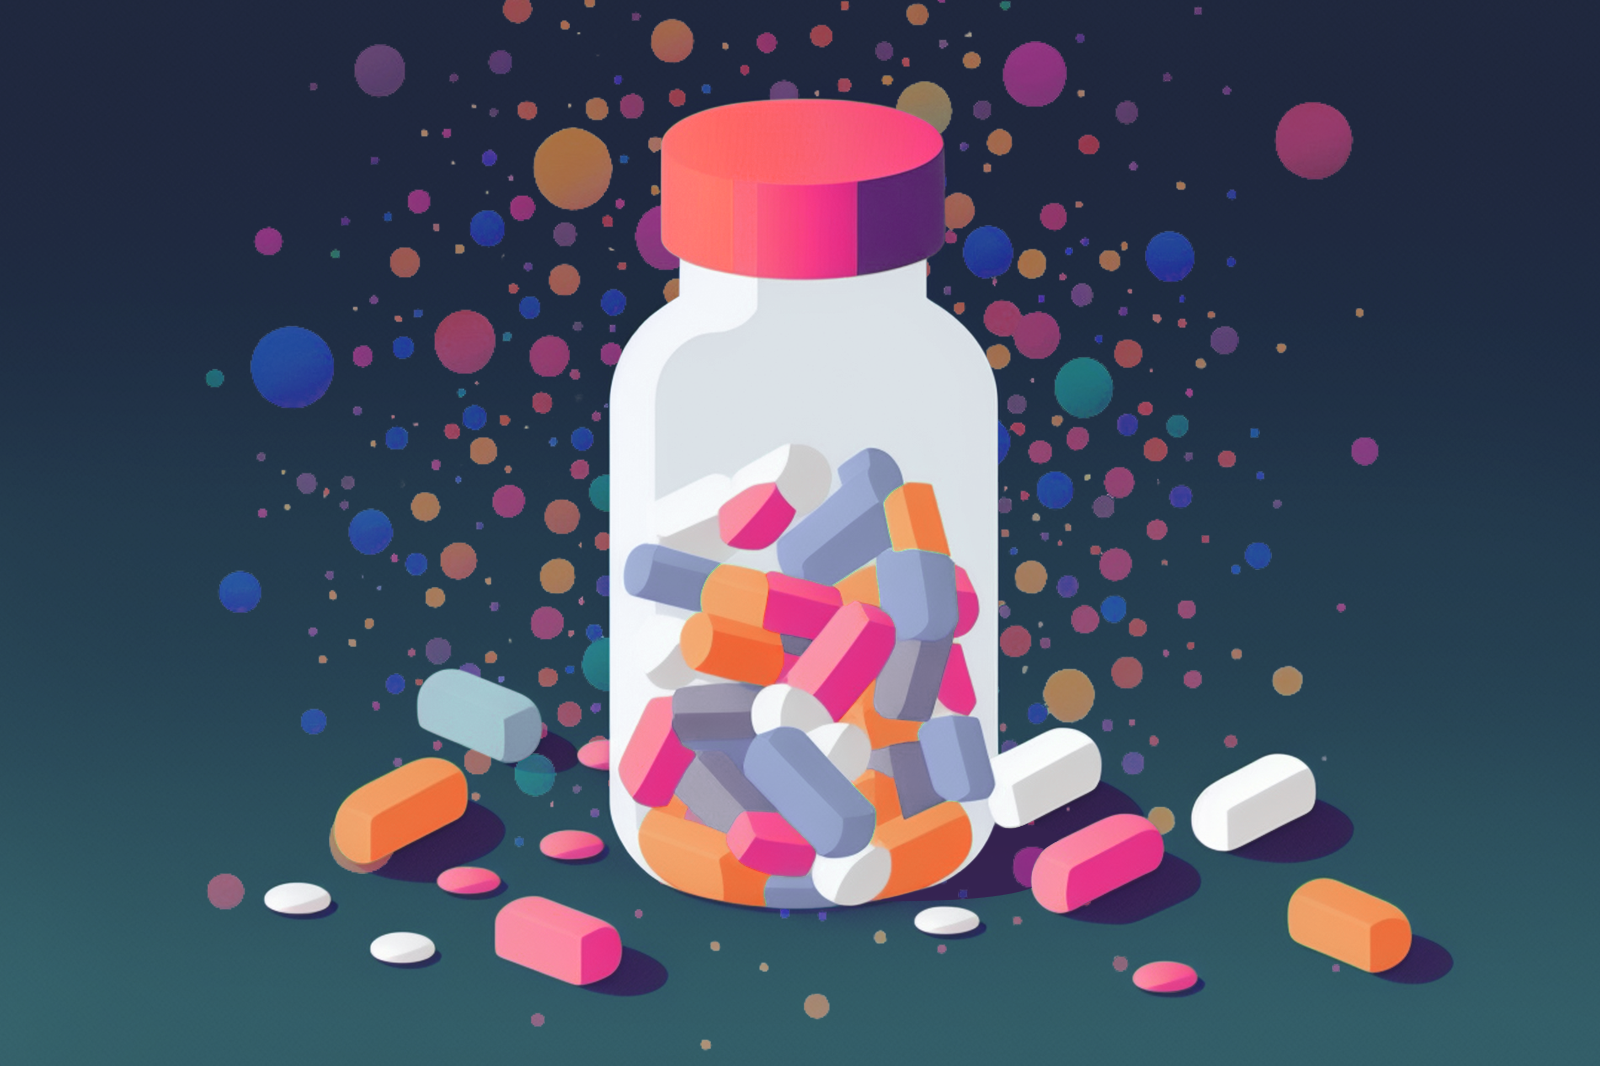 An illustrated prescription bottle filled with tablets with loose pills scattered on a blue surface against a dark blue background